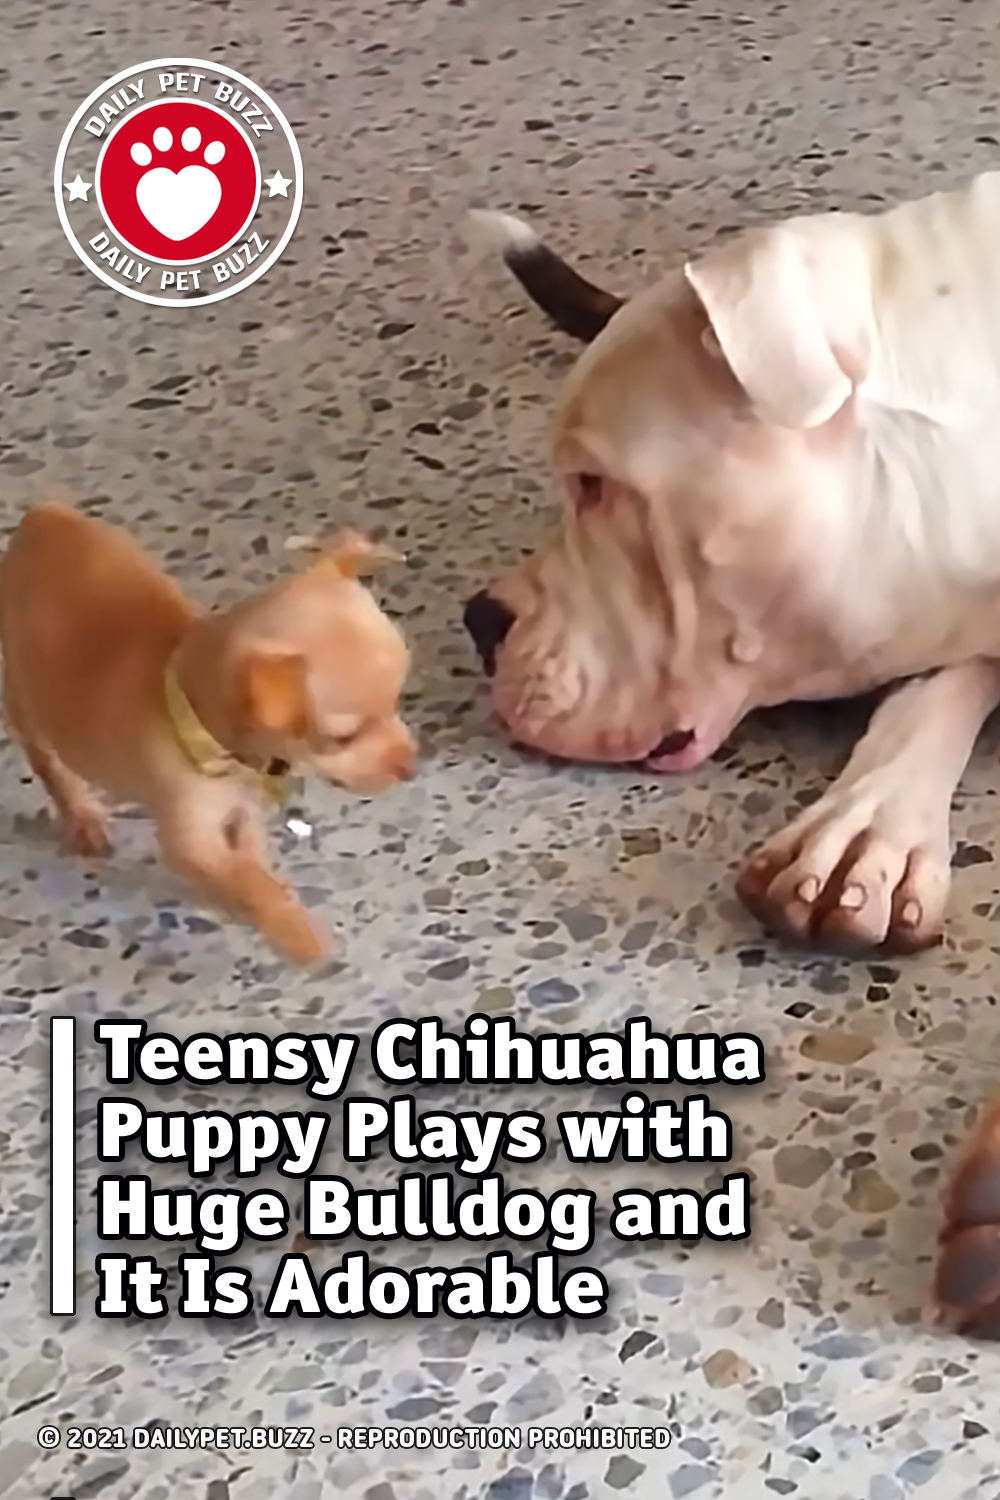 Teensy Chihuahua Puppy Plays with Huge Bulldog and It Is Adorable